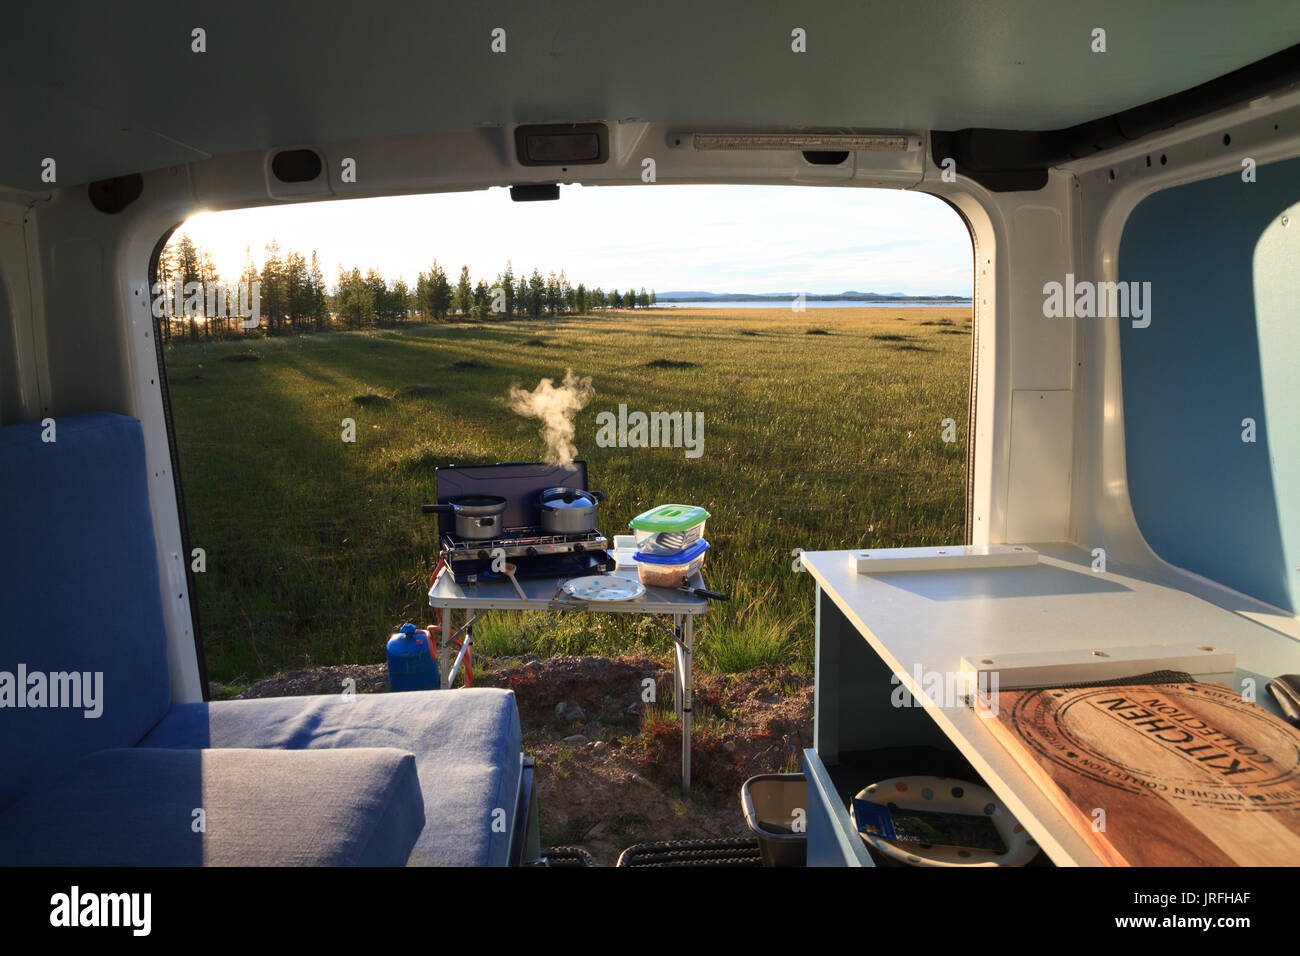 View from inside while cooking outside while free camping in a camper van Stock Photo